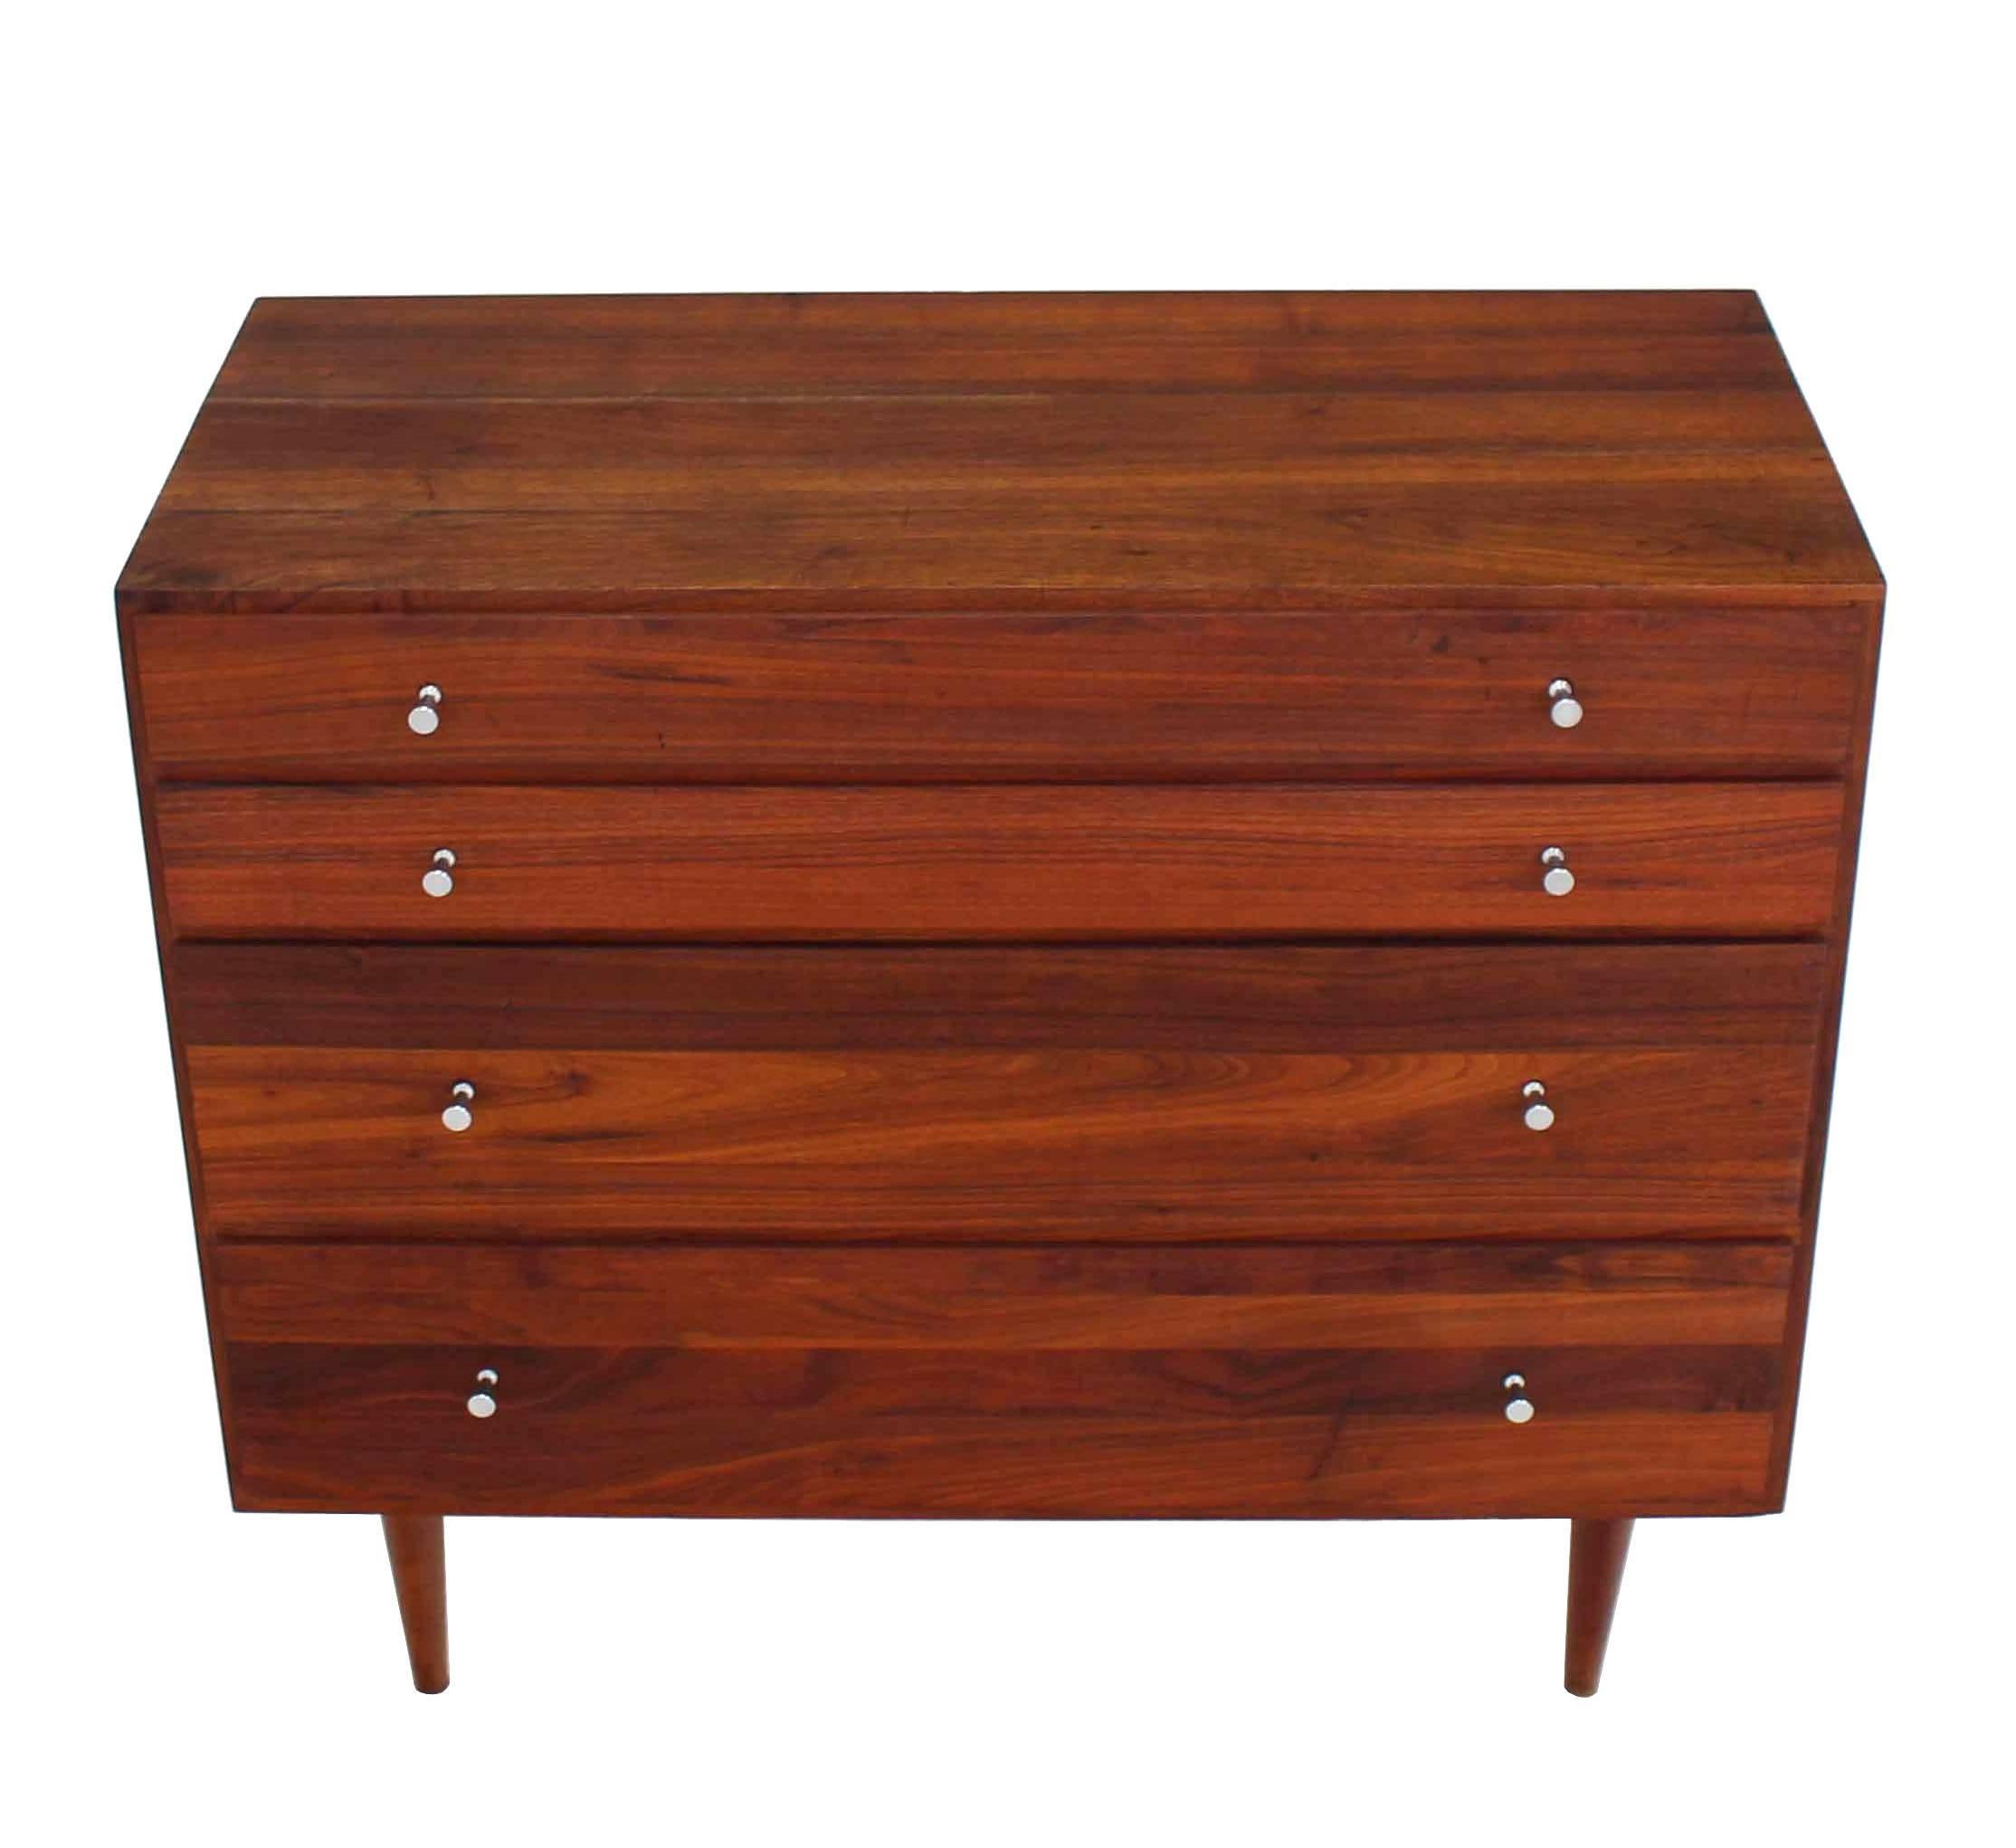 Very nice solid walnut bachelor chest. Satin low gloss oil like finish.